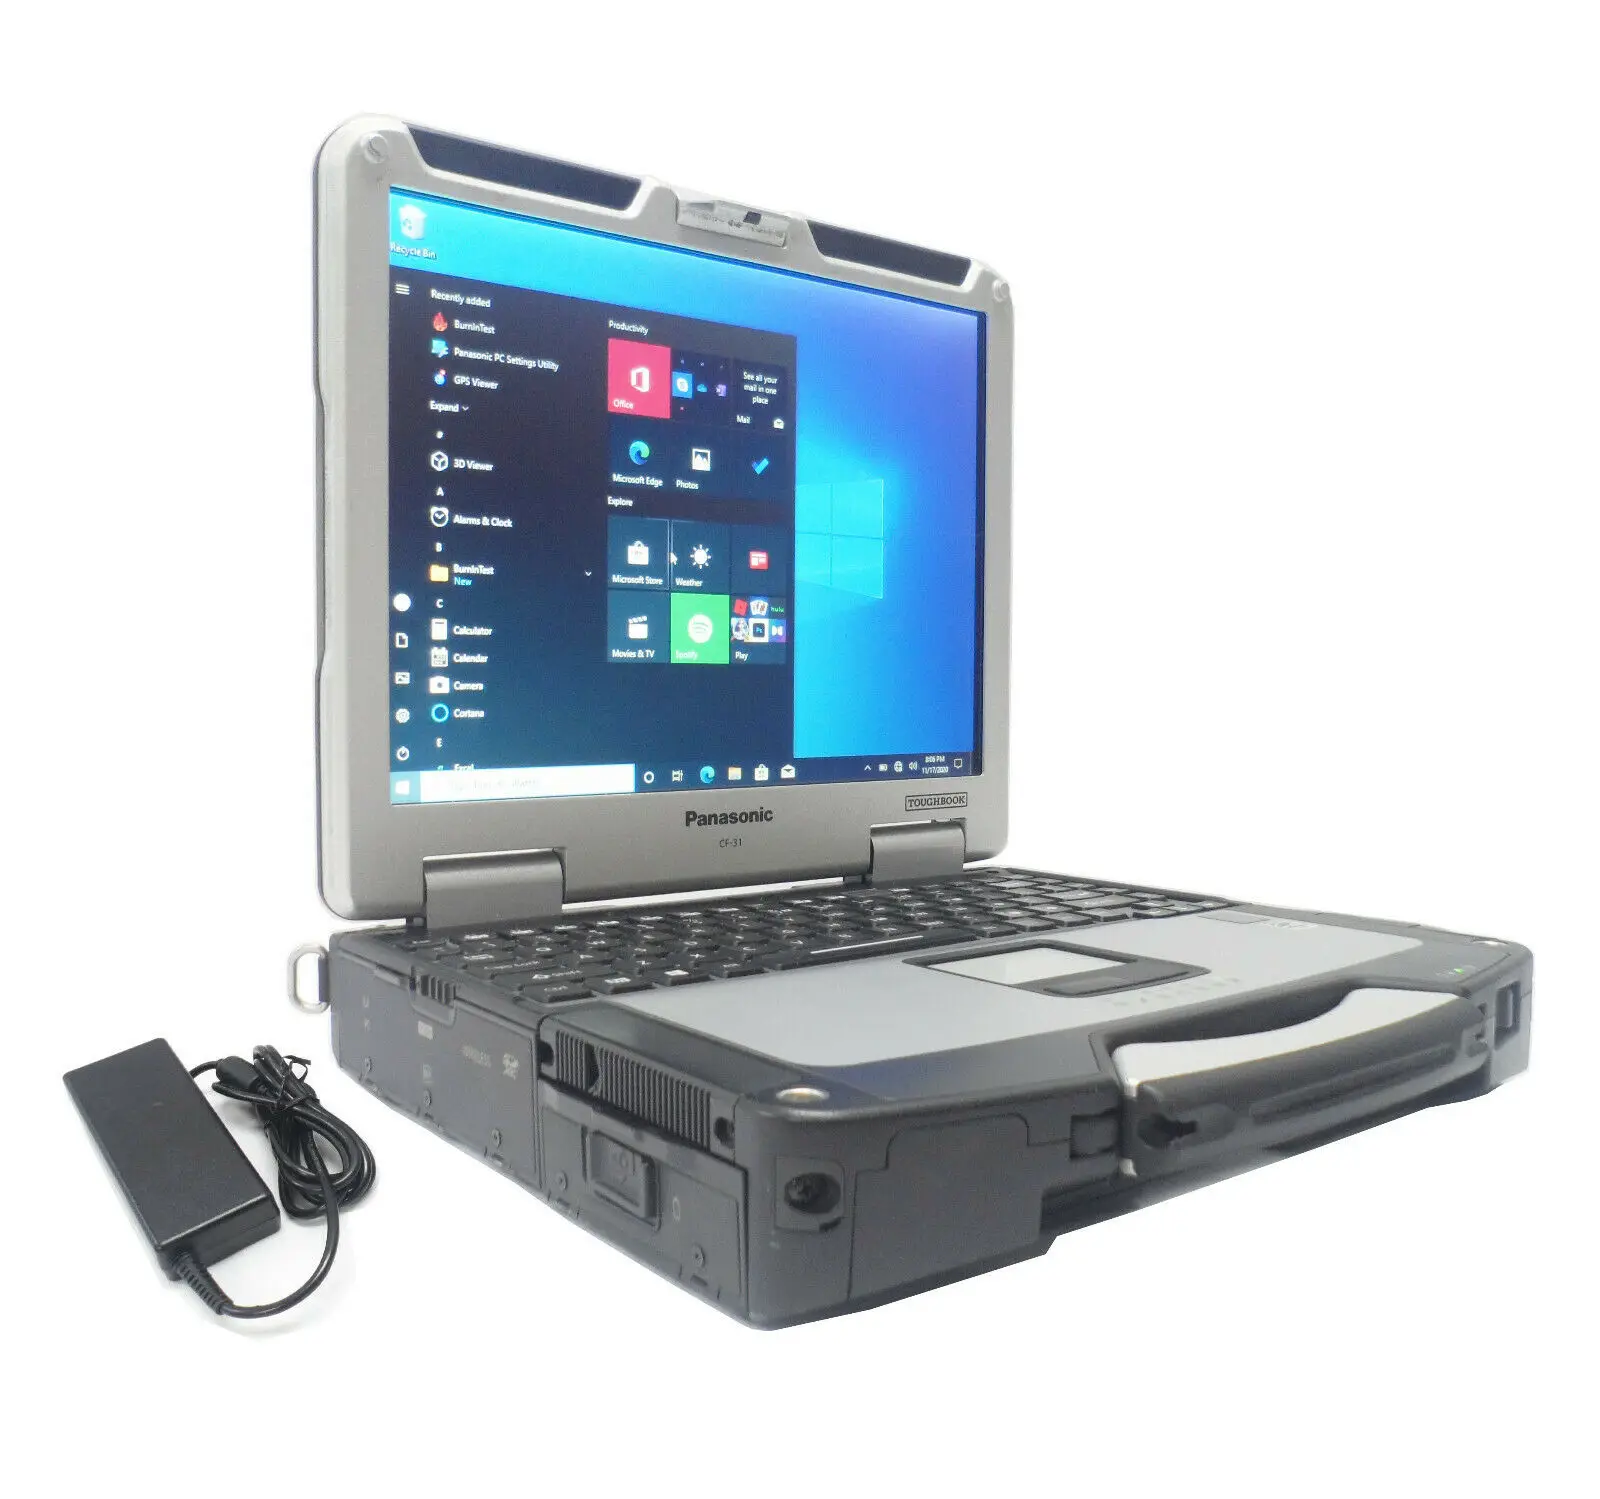 used fully rugged laptop panasonic toughbook cf 31 mk5 i5 5300u 2 30ghz 8gb 16gb ram ssd touch screen 4g lte backlit win10 pro free global shipping